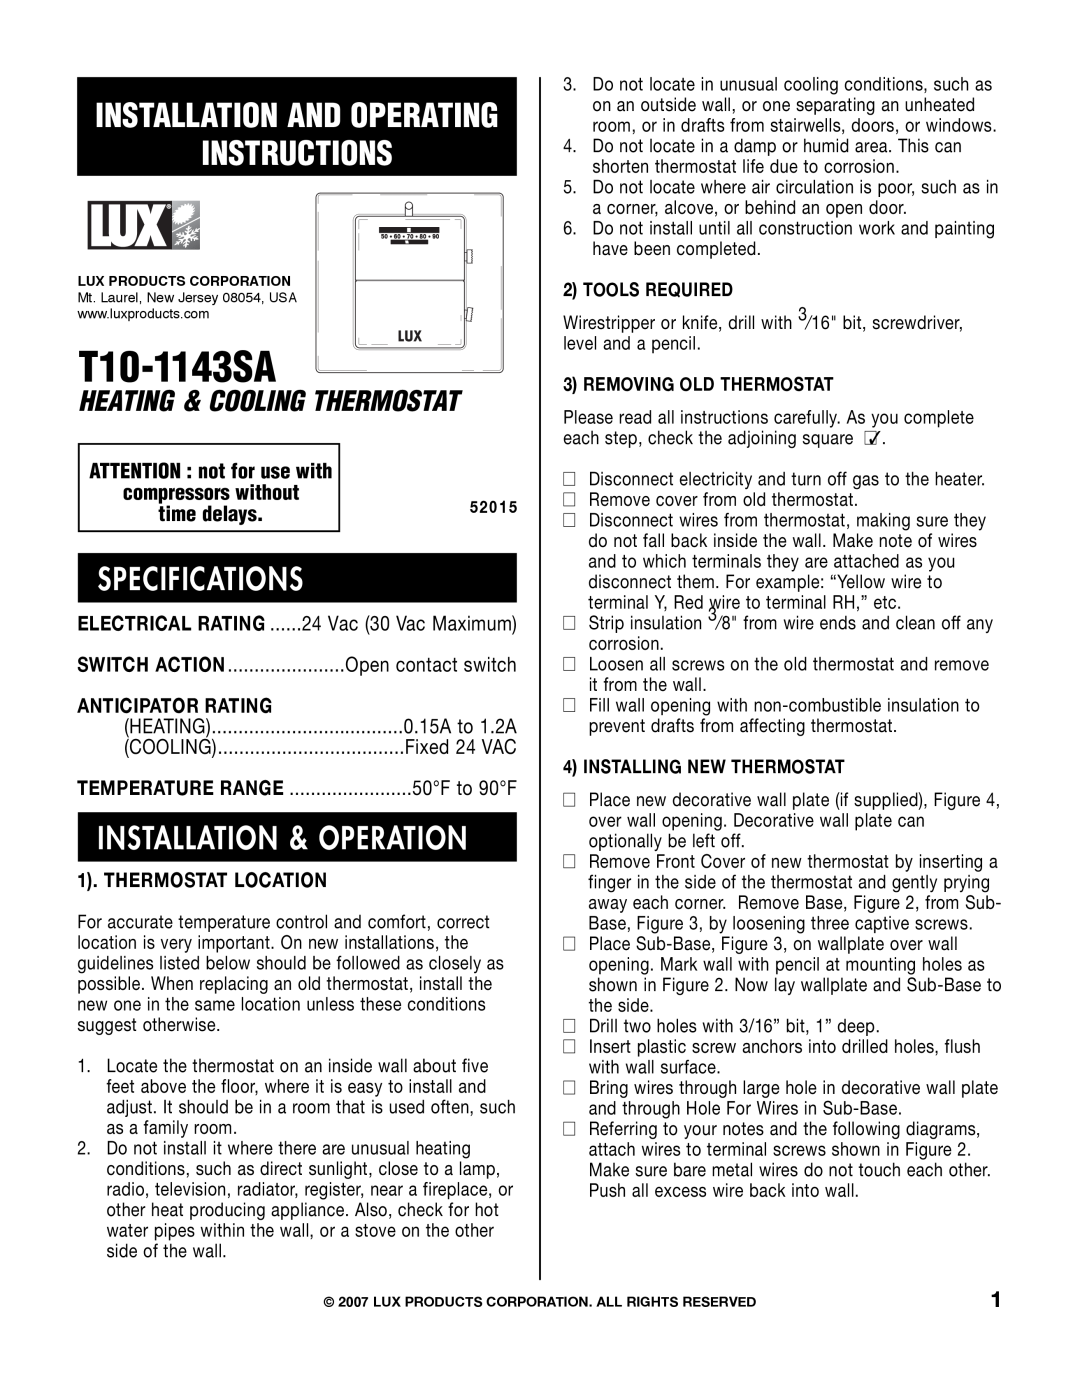 Lux Products T10-1143SA specifications Specifications, Installation & Operation, Tools Required, Removing Old Thermostat 